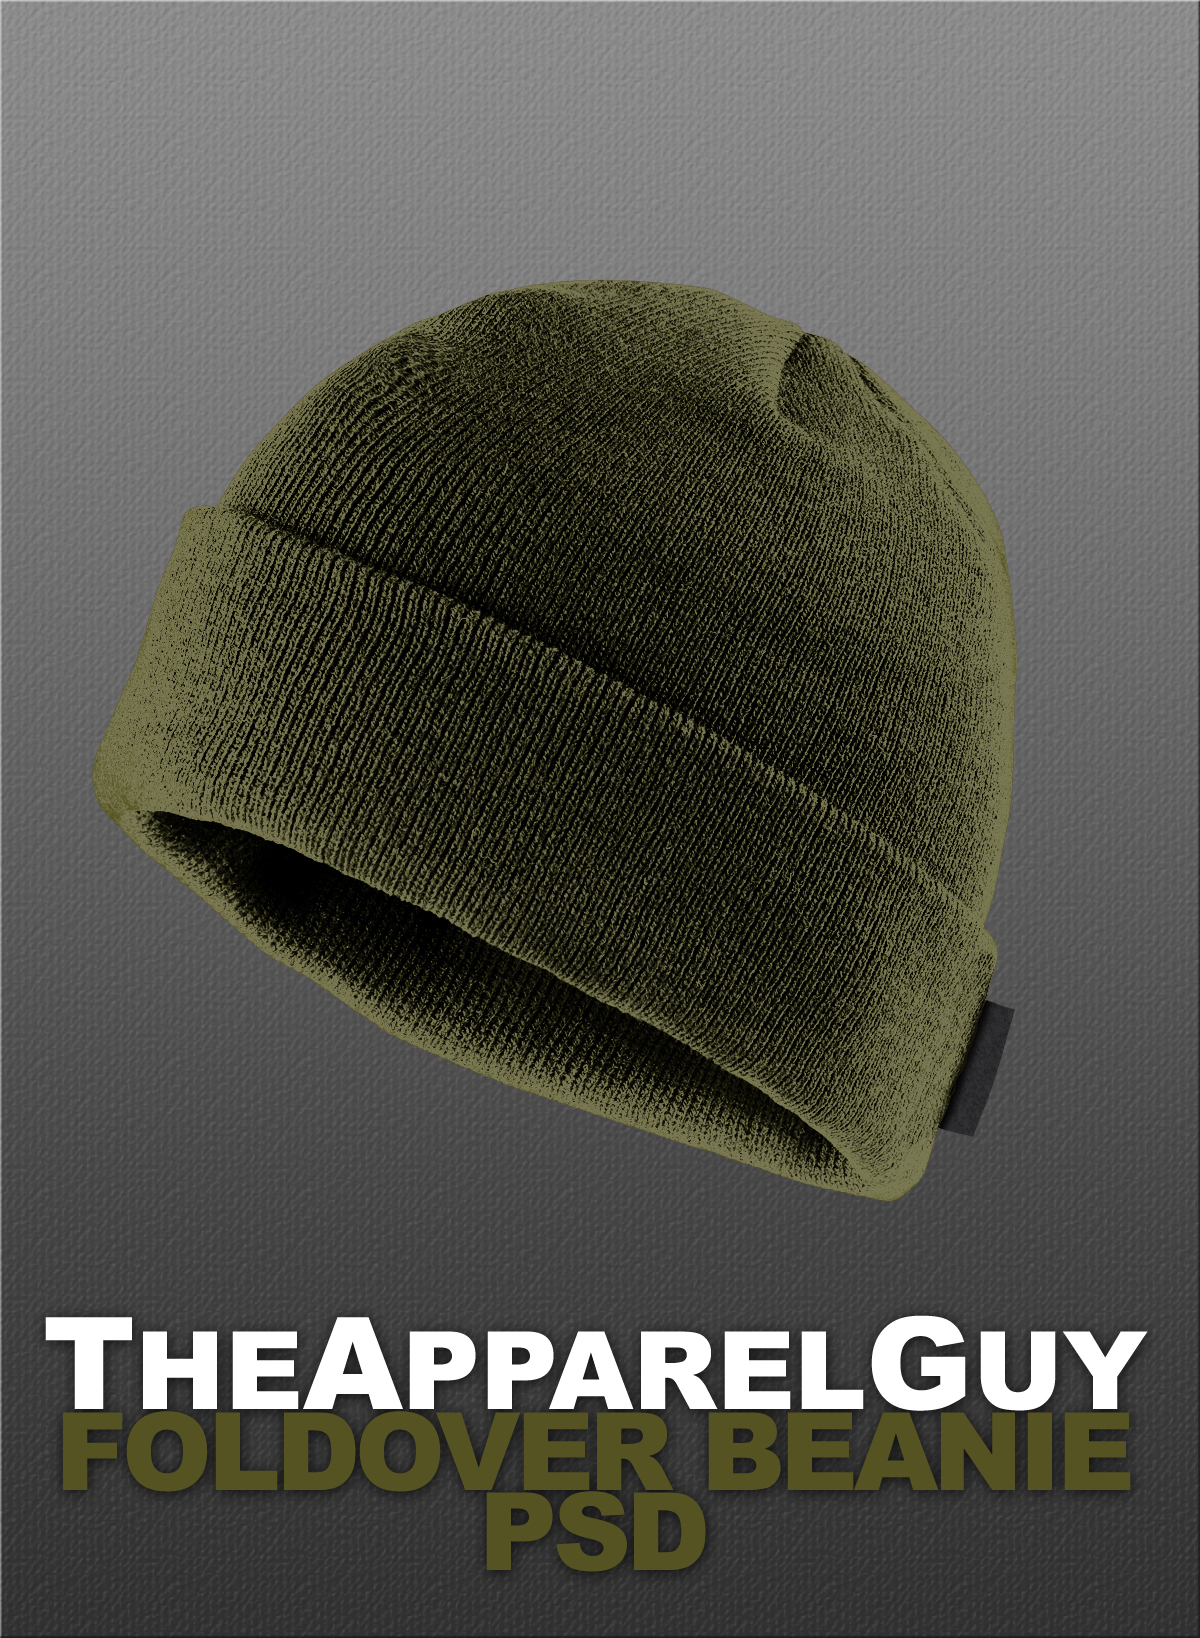 Download Foldover Beanie Psd By Theapparelguy On Deviantart